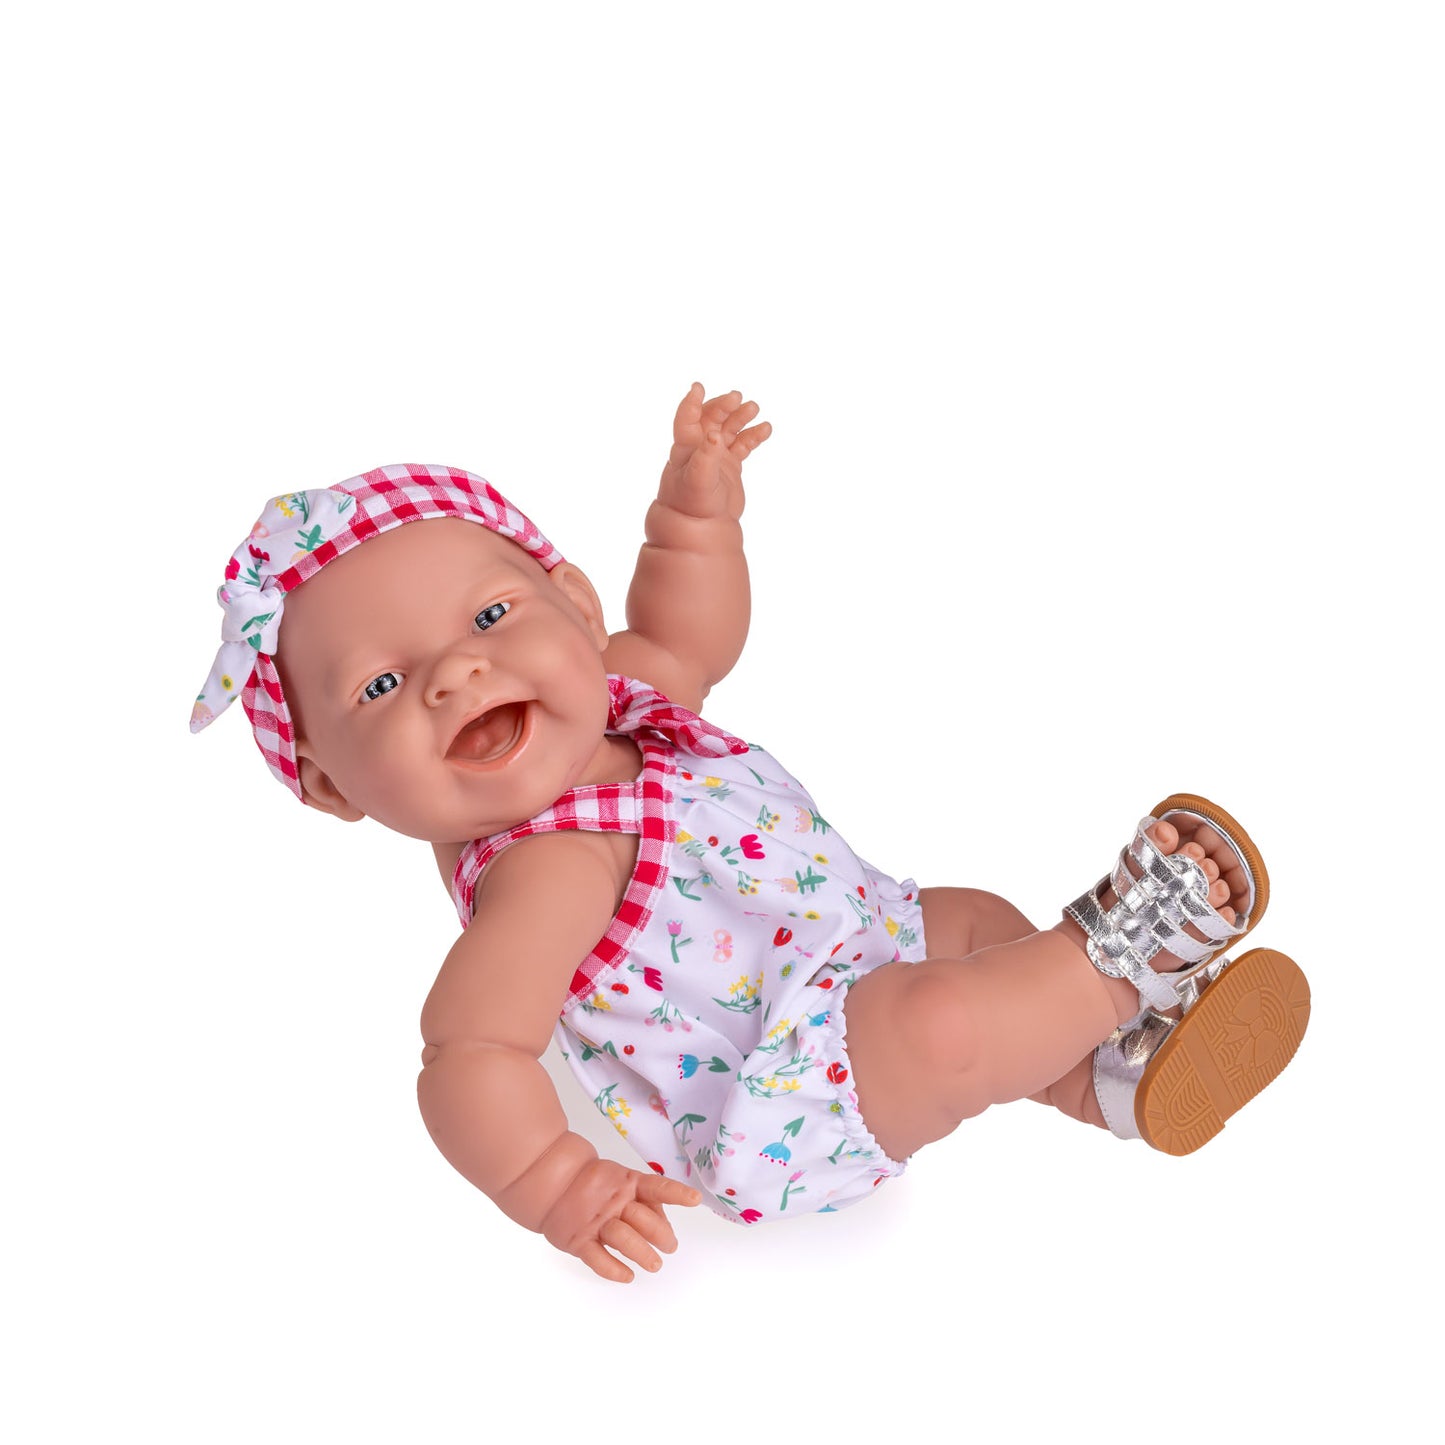 Lola Spring Picnic 14” Realistic All Vinyl Posable Play Doll "REAL GIRL" – Happy Face- Dressed in 2 Piece Fun Collection Outfit with Shoes -By Berenguer Boutique